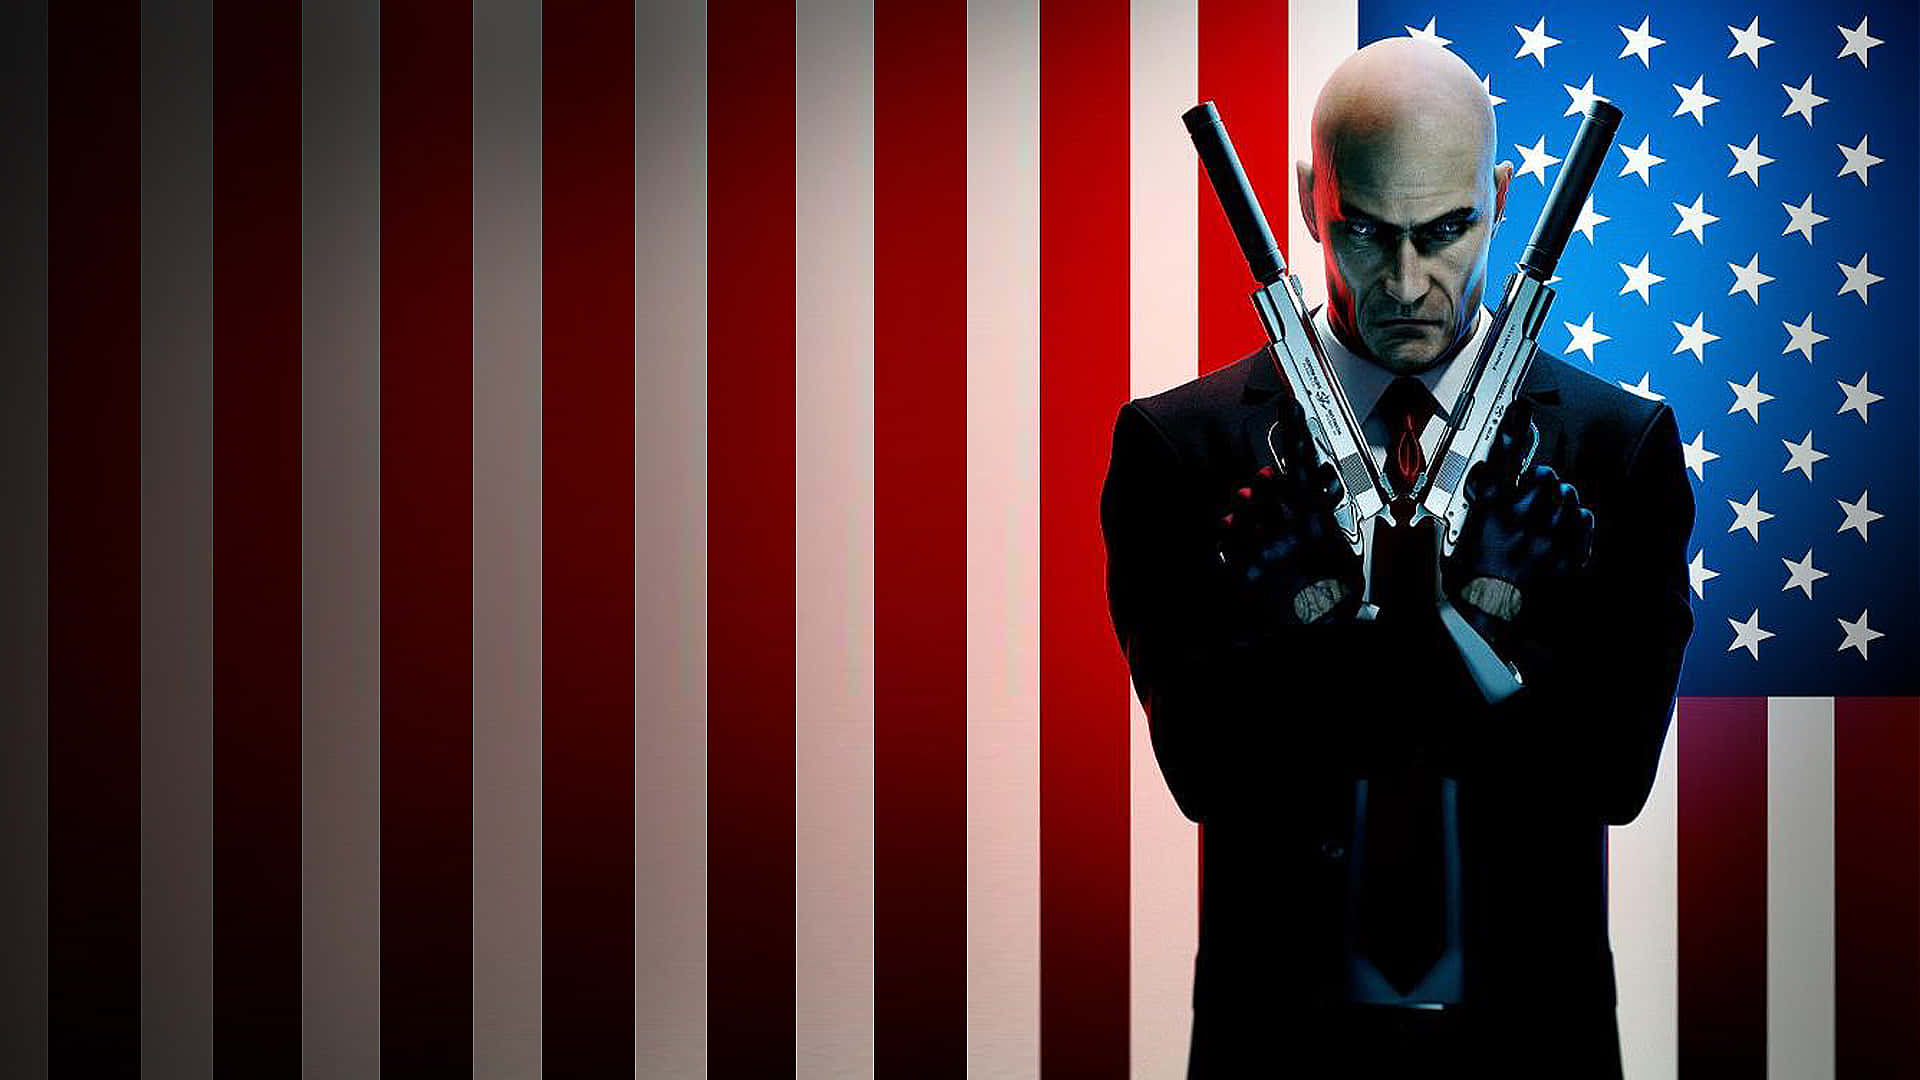 Taking on Professional Missions in Hitman Absolution